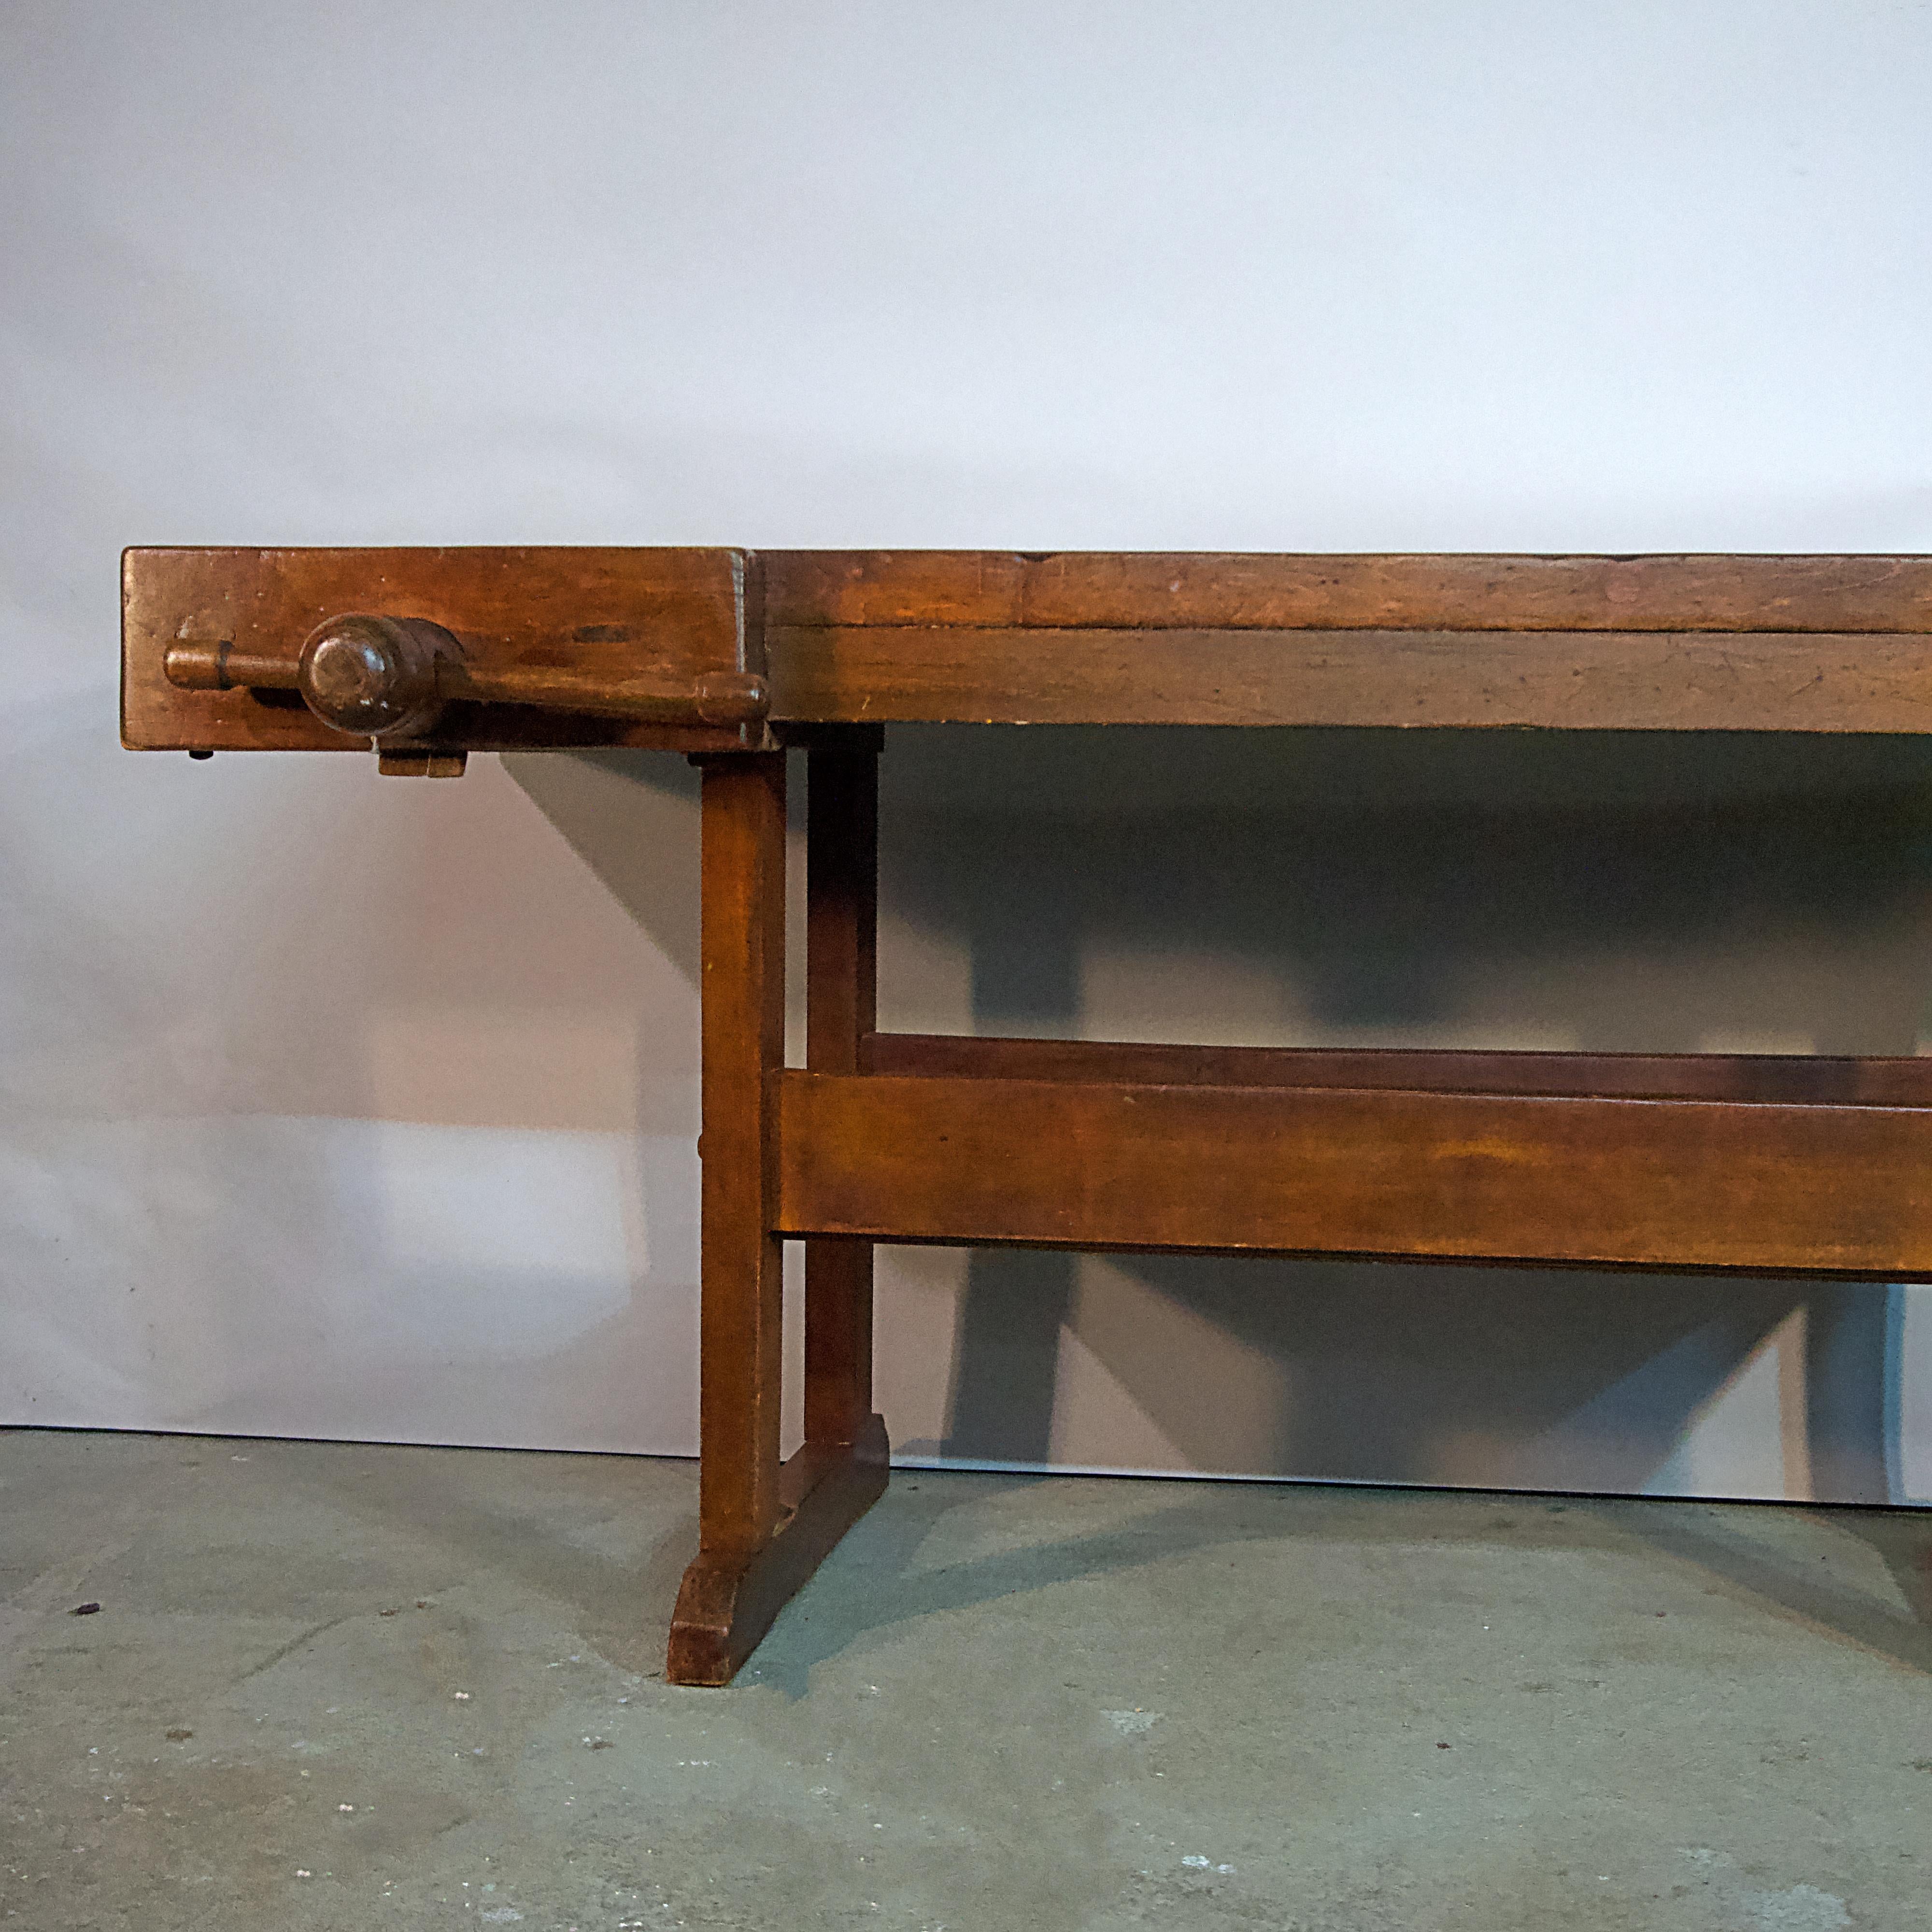 Cabinet Makers Work Bench, as Sideboard, Serving Table or Bar In Good Condition For Sale In New York, NY